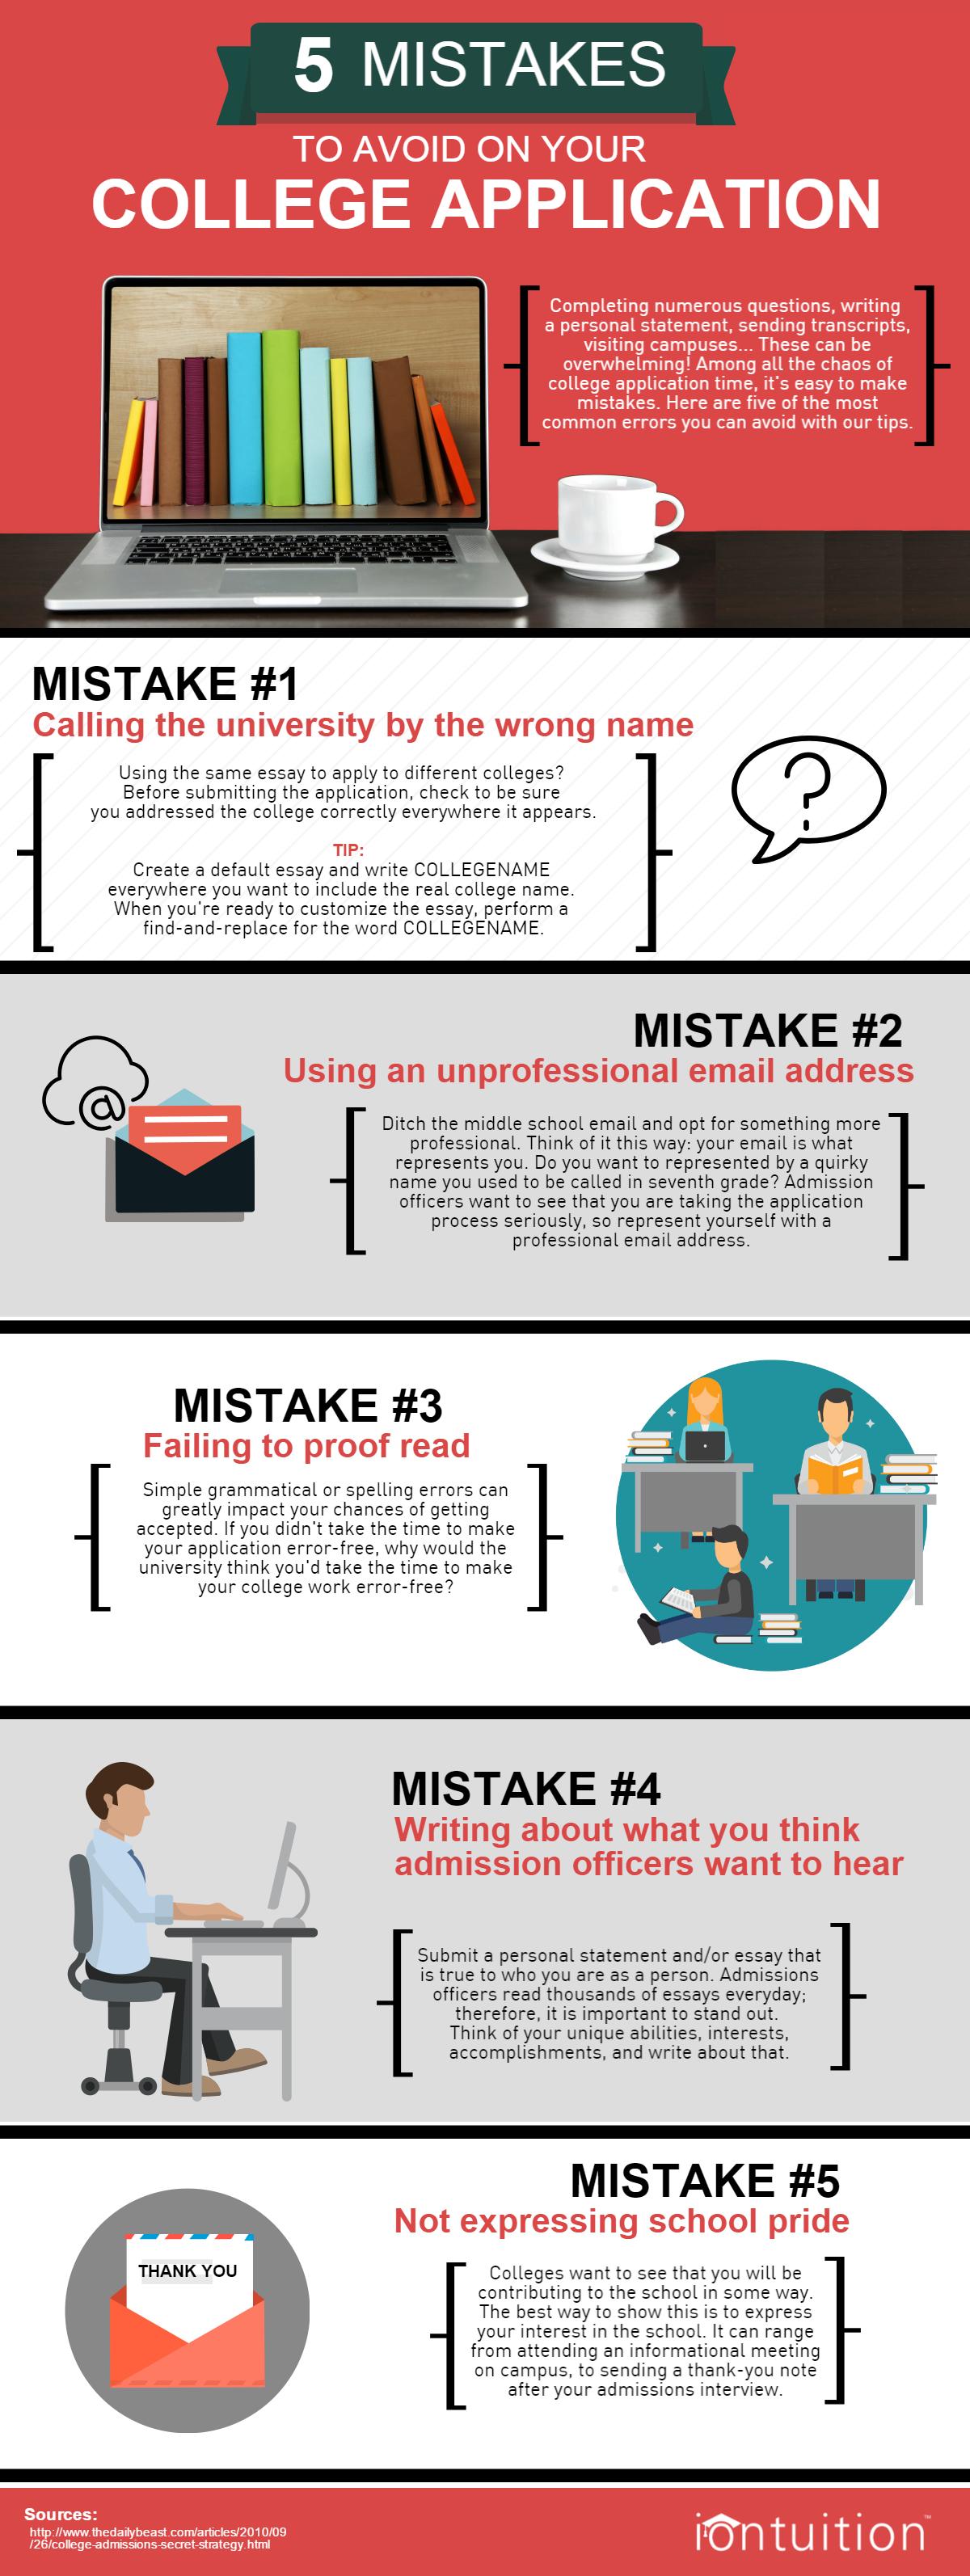 Five mistakes to avoid on your college application - iontuition blog - infographic